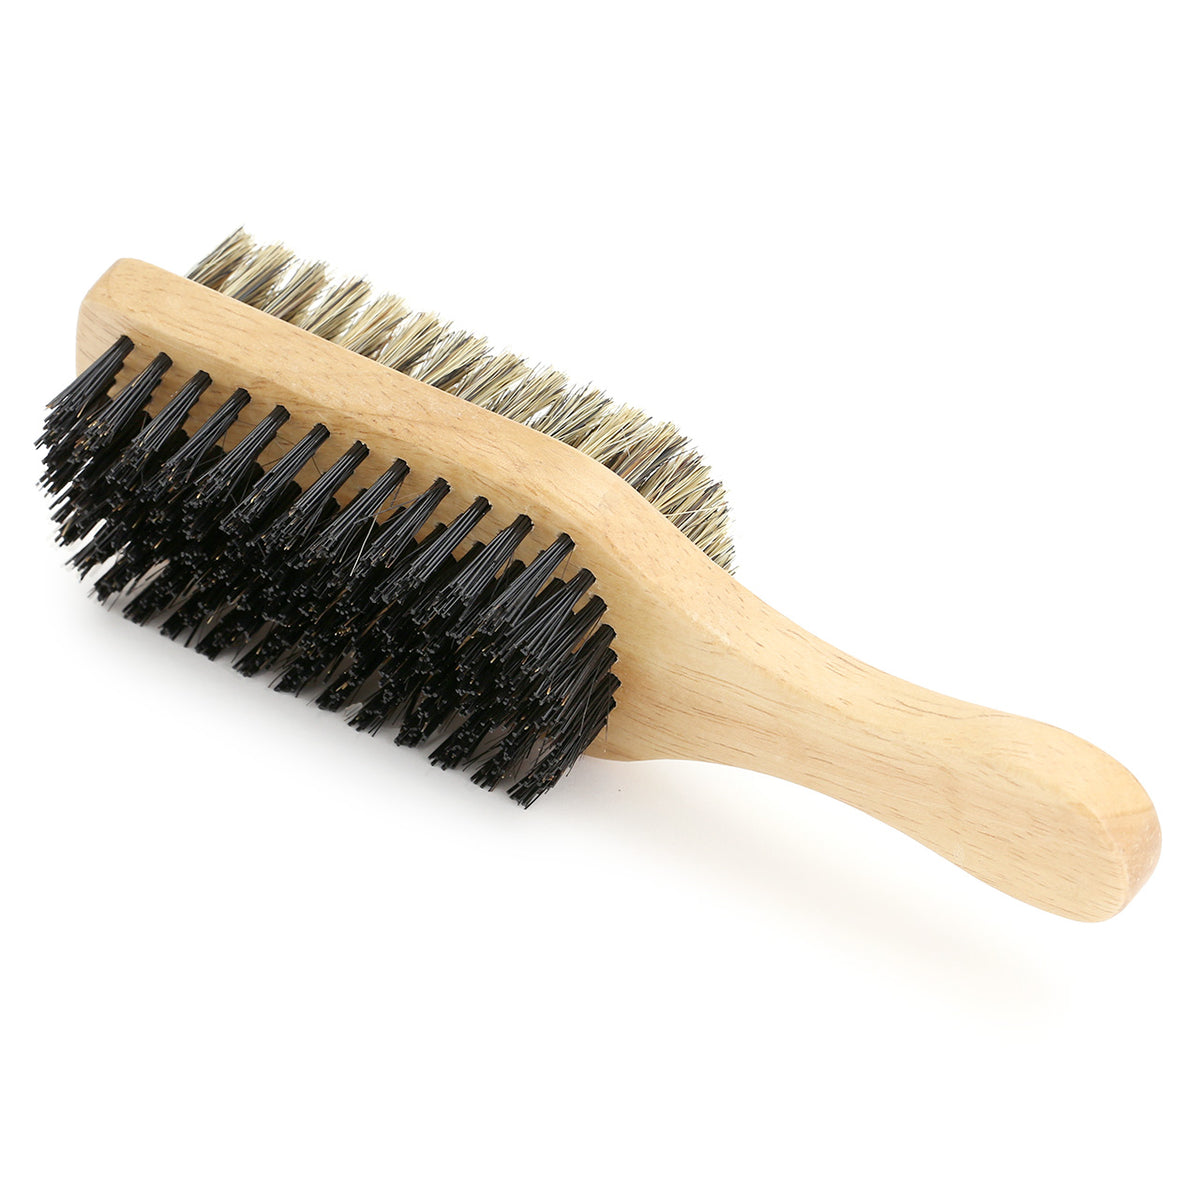 Beard Brush, two sided with wooden paddle handle - three quarter view